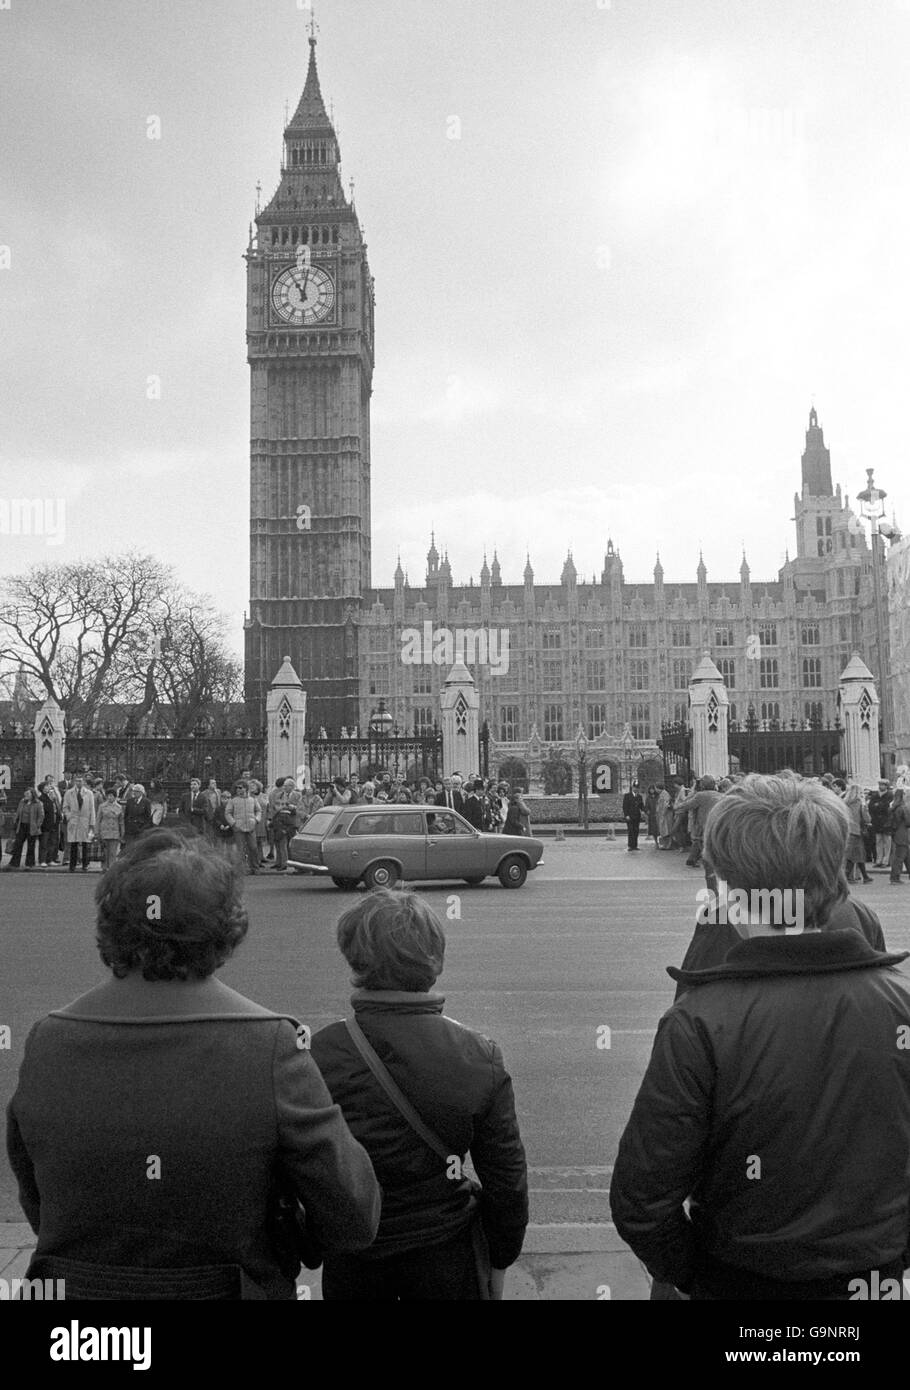 The scene in Parliament Square outside the Houses of Parliament at shortly after 11 o'clock when MPs were sitting - for the first time on a Saturday since the Suez crisis in 1956 - to discuss the invasion of the Falkland Islands by Argentina. Stock Photo